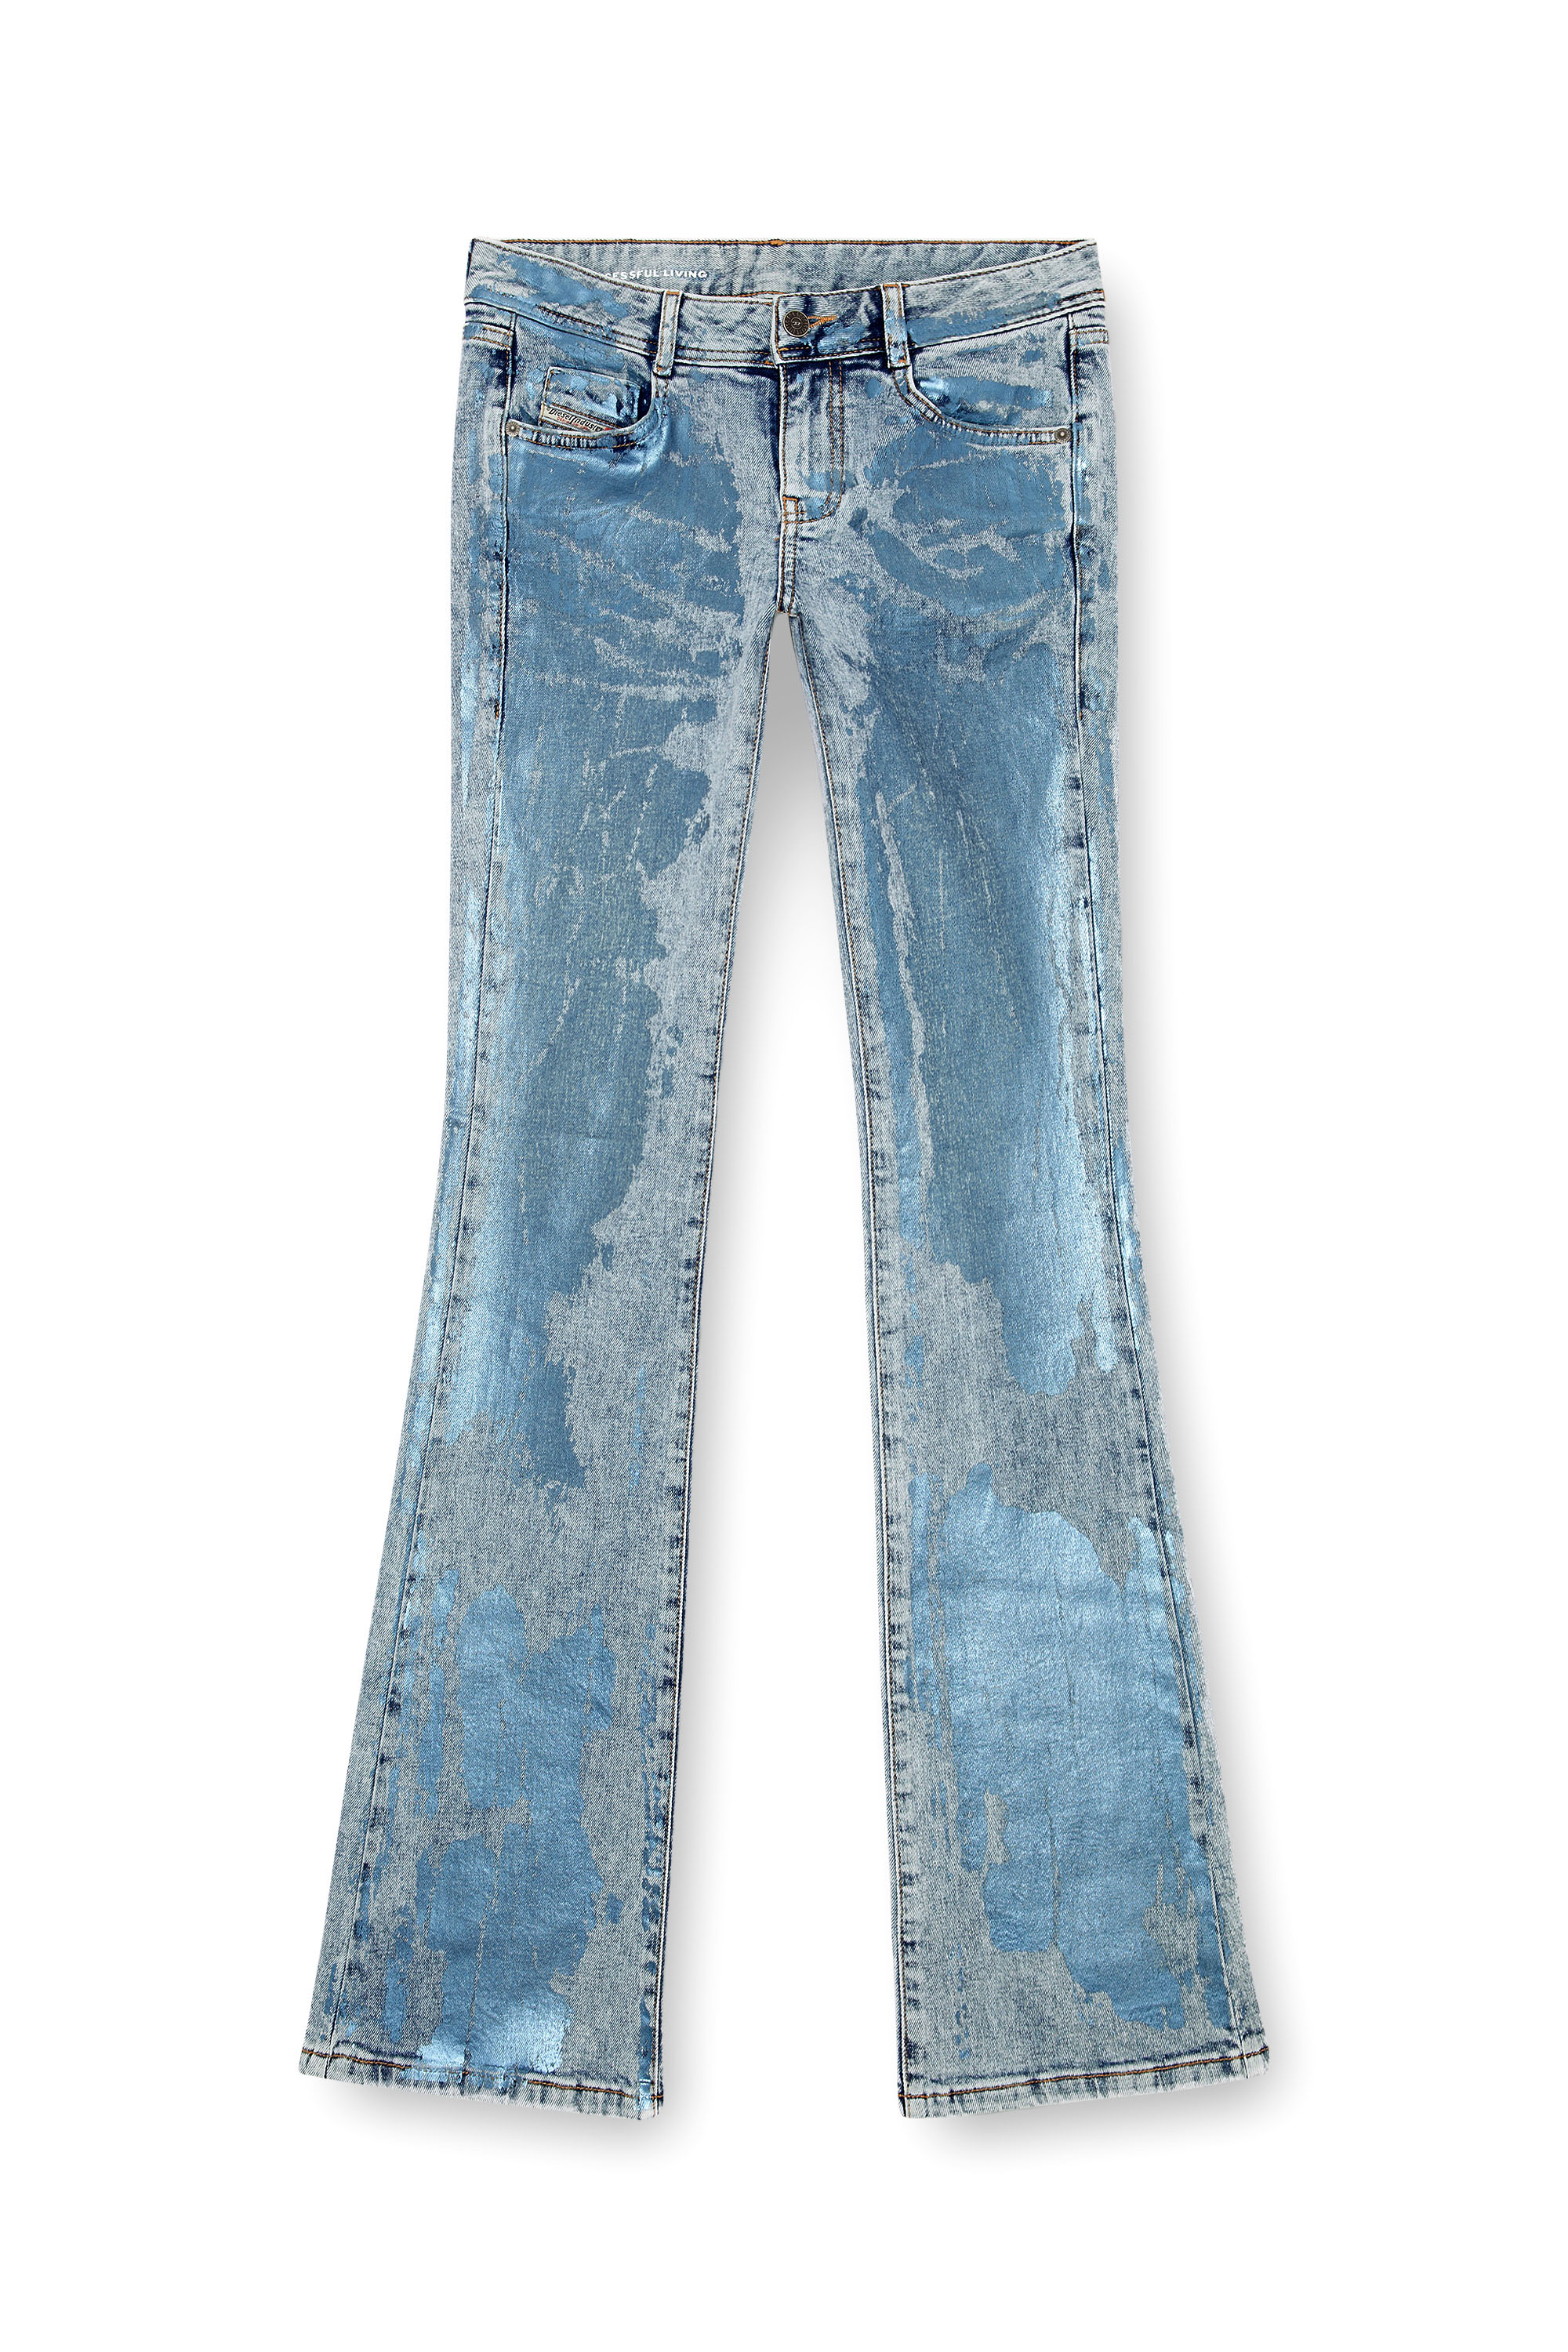 Diesel - Bootcut and Flare Jeans 1969 D-Ebbey 0AJEU, Mujer Bootcut y Flare Jeans - 1969 D-Ebbey in Azul marino - Image 5